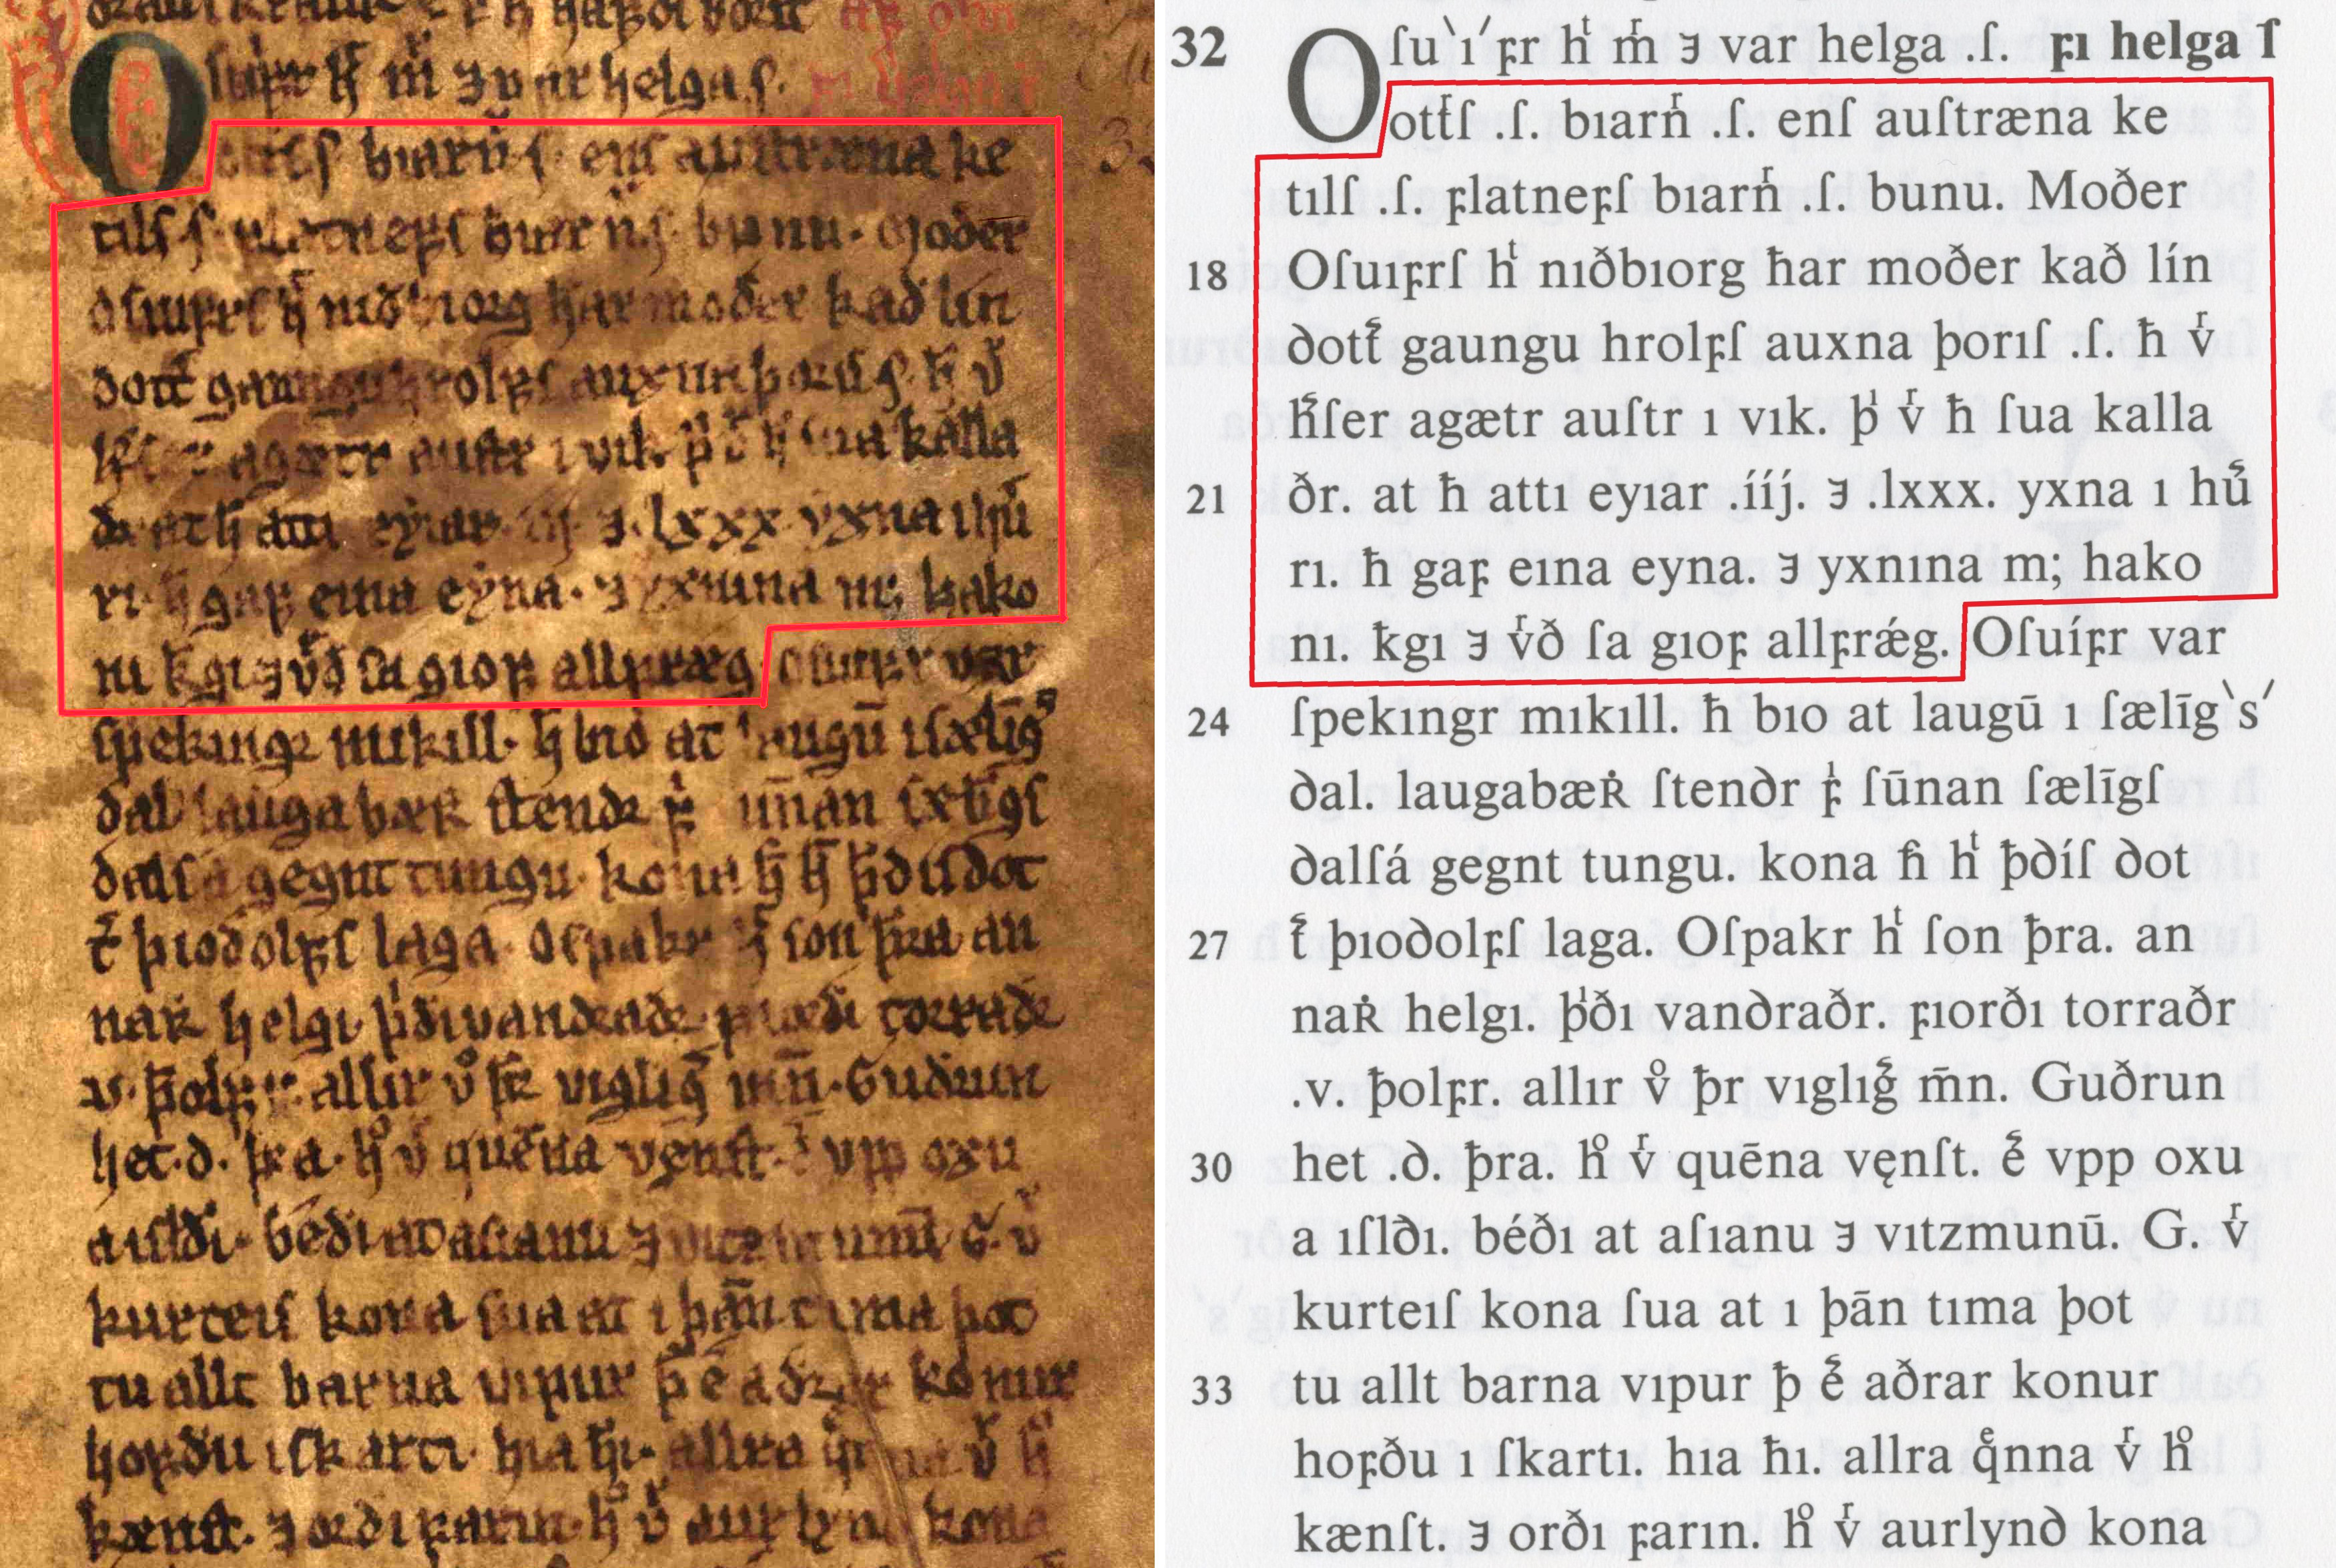 Figure 1, (left) a leaf from the early fourteenth-century manuscript AM 132 fol. (170r) or Möðruvallabók, courtesy of handrit.is, and (right) the same passage from a type-facsimile edition of the manuscript, Möðruvallabók (AM 132 Fol.), 170r, each containing the passage from Laxdæla saga cited above. The portion of the text contained within the box is the passage Halldór omits in his edition of the saga, as discussed above.